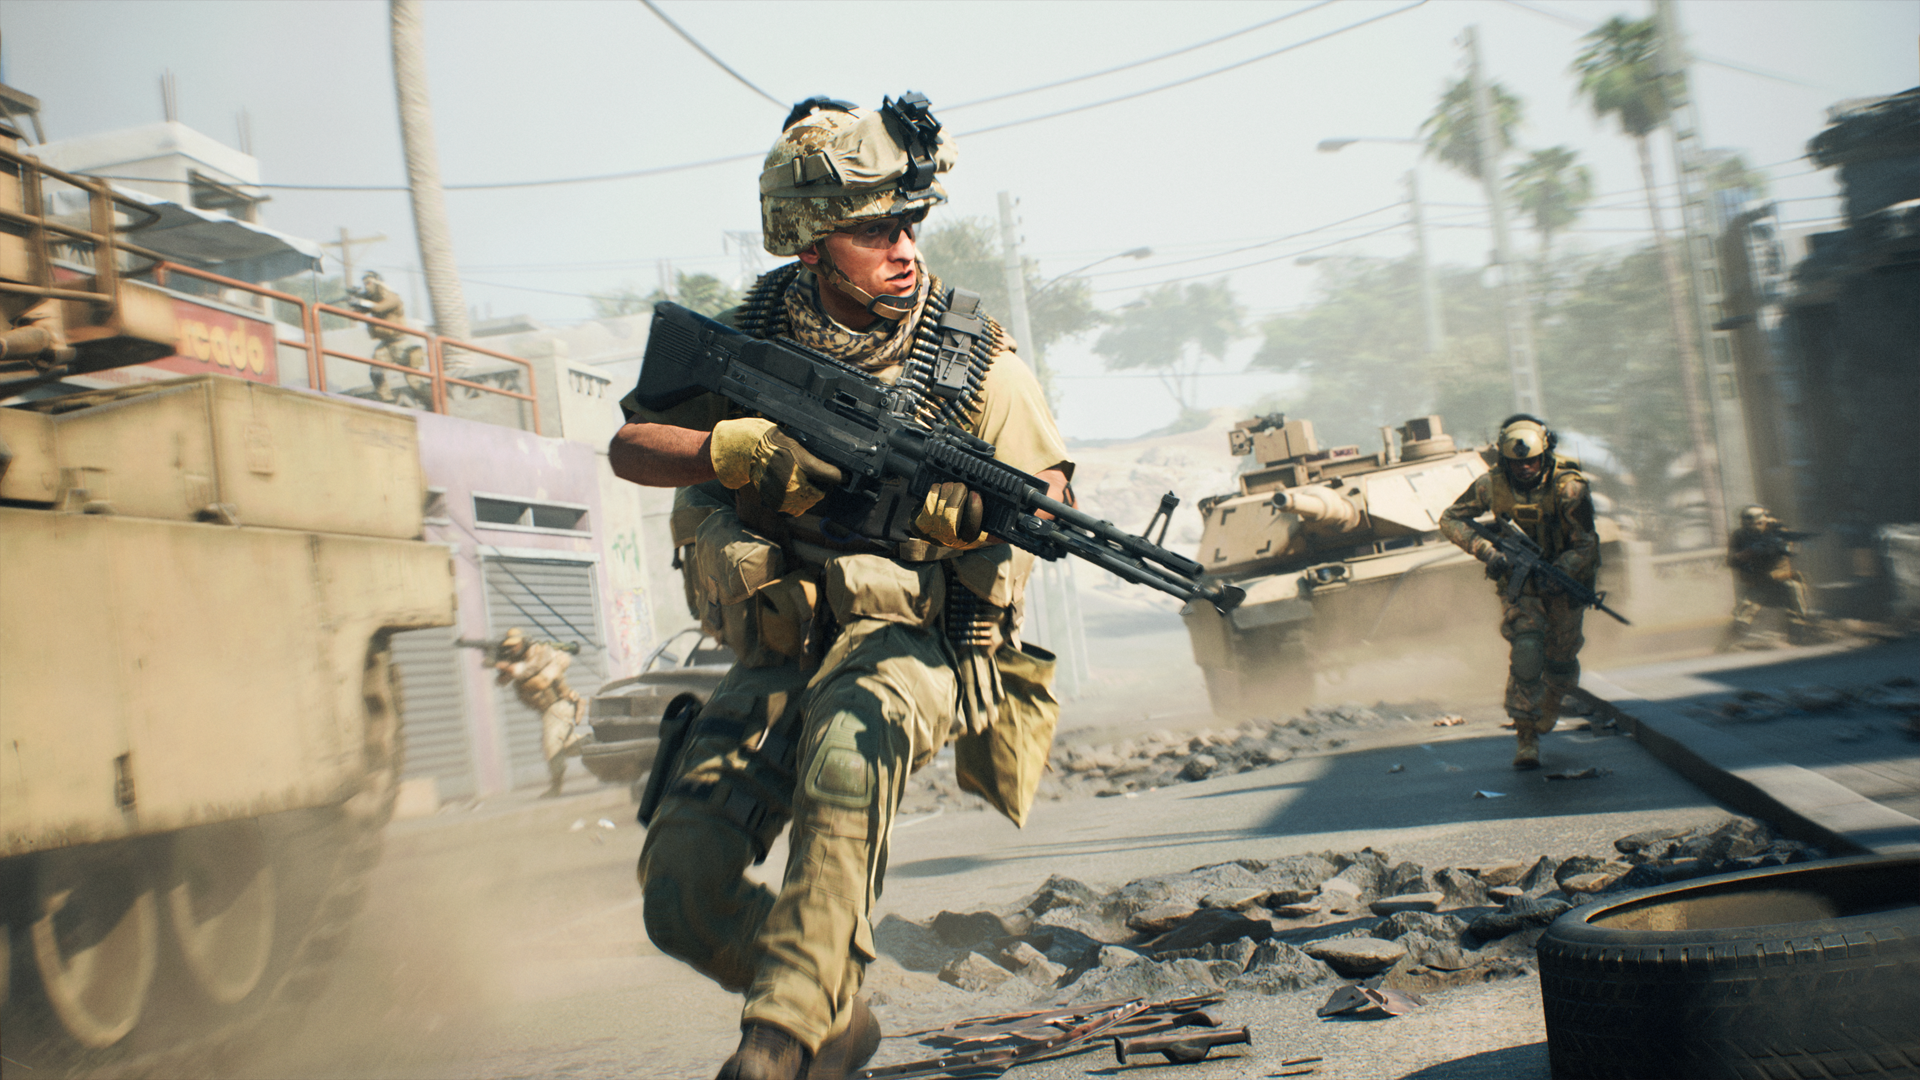 Battlefield 2042' Lags Behind 'Battlefield V' on Steam Charts As Player  Count Drops Again